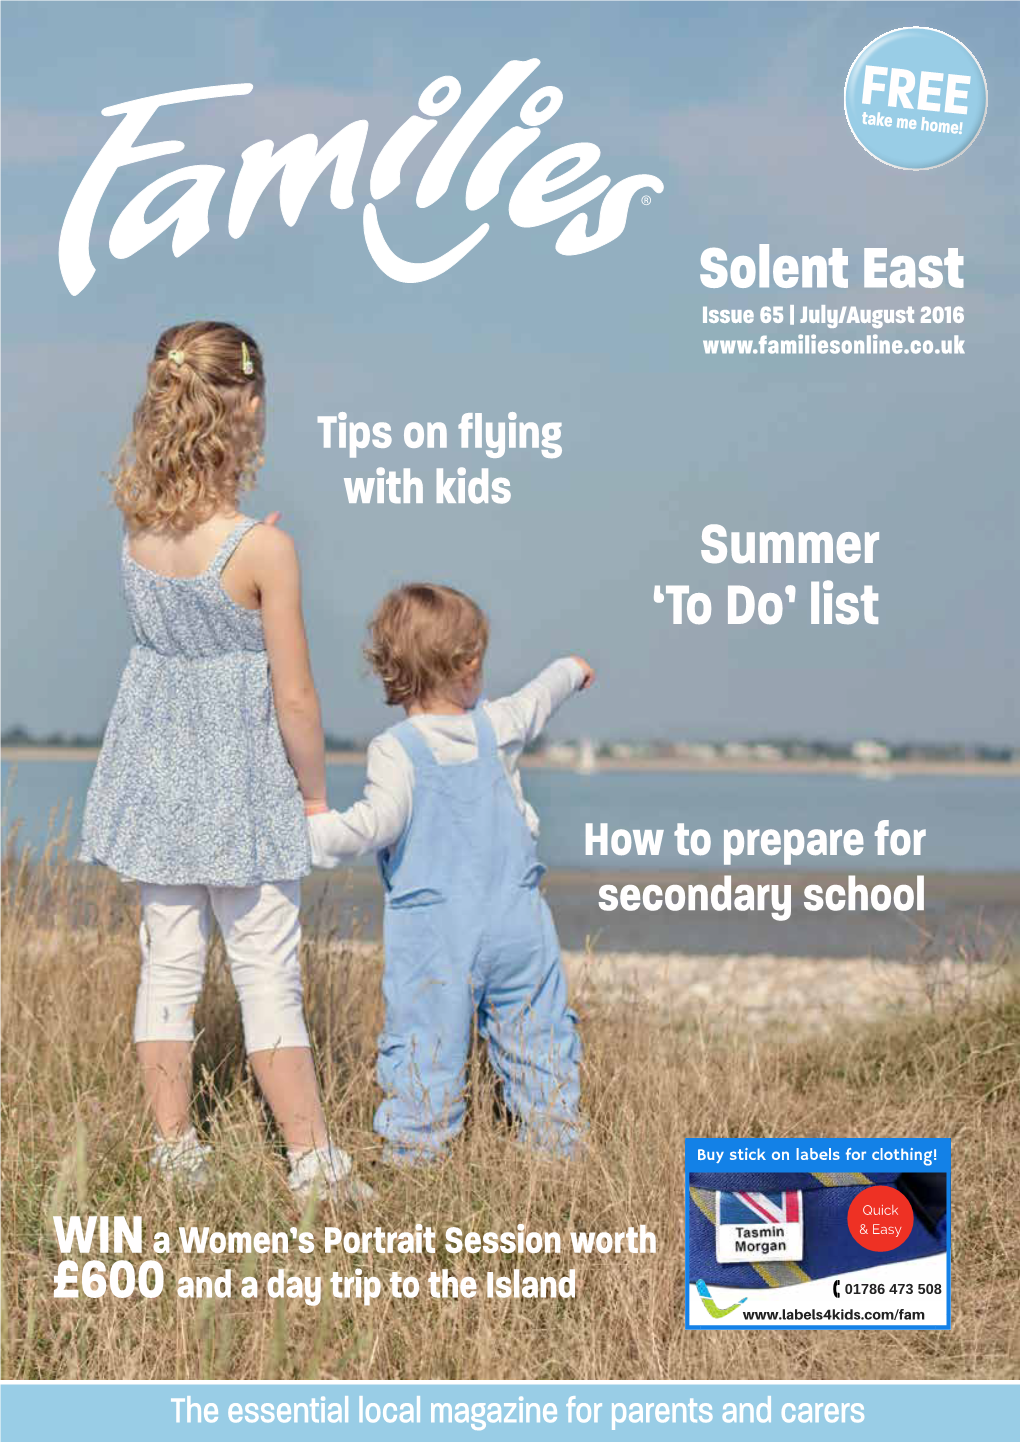 Solent East Issue 65 | July/August 2016 Party .Co.Uk Kids Will Love Tips on Flying with Kids Summer ‘To Do’ List